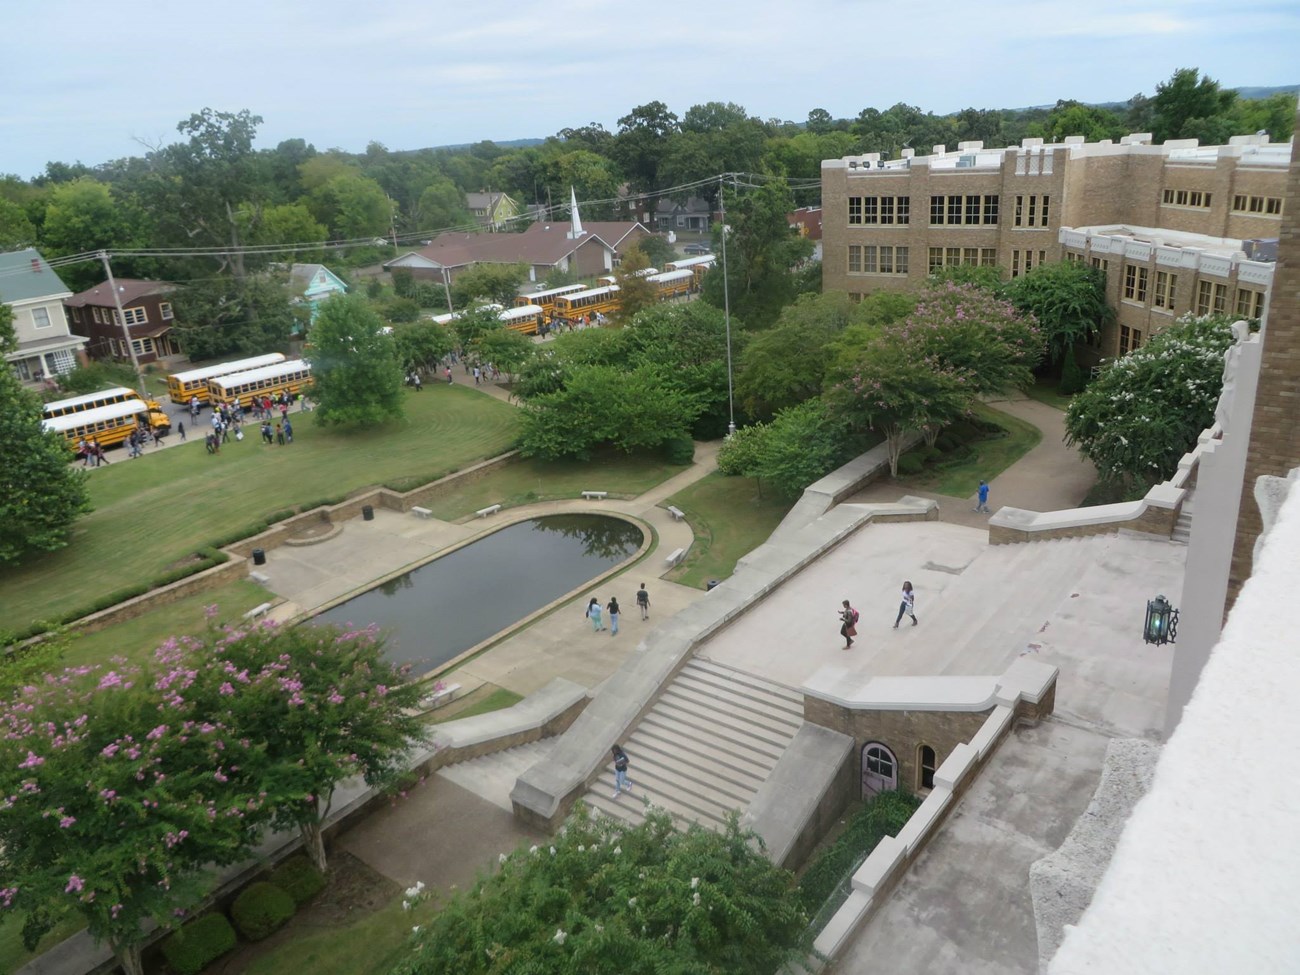 Overhead view of Central High School landscape, showing houses across the street, trees and reflecting pool, and broad staircase.